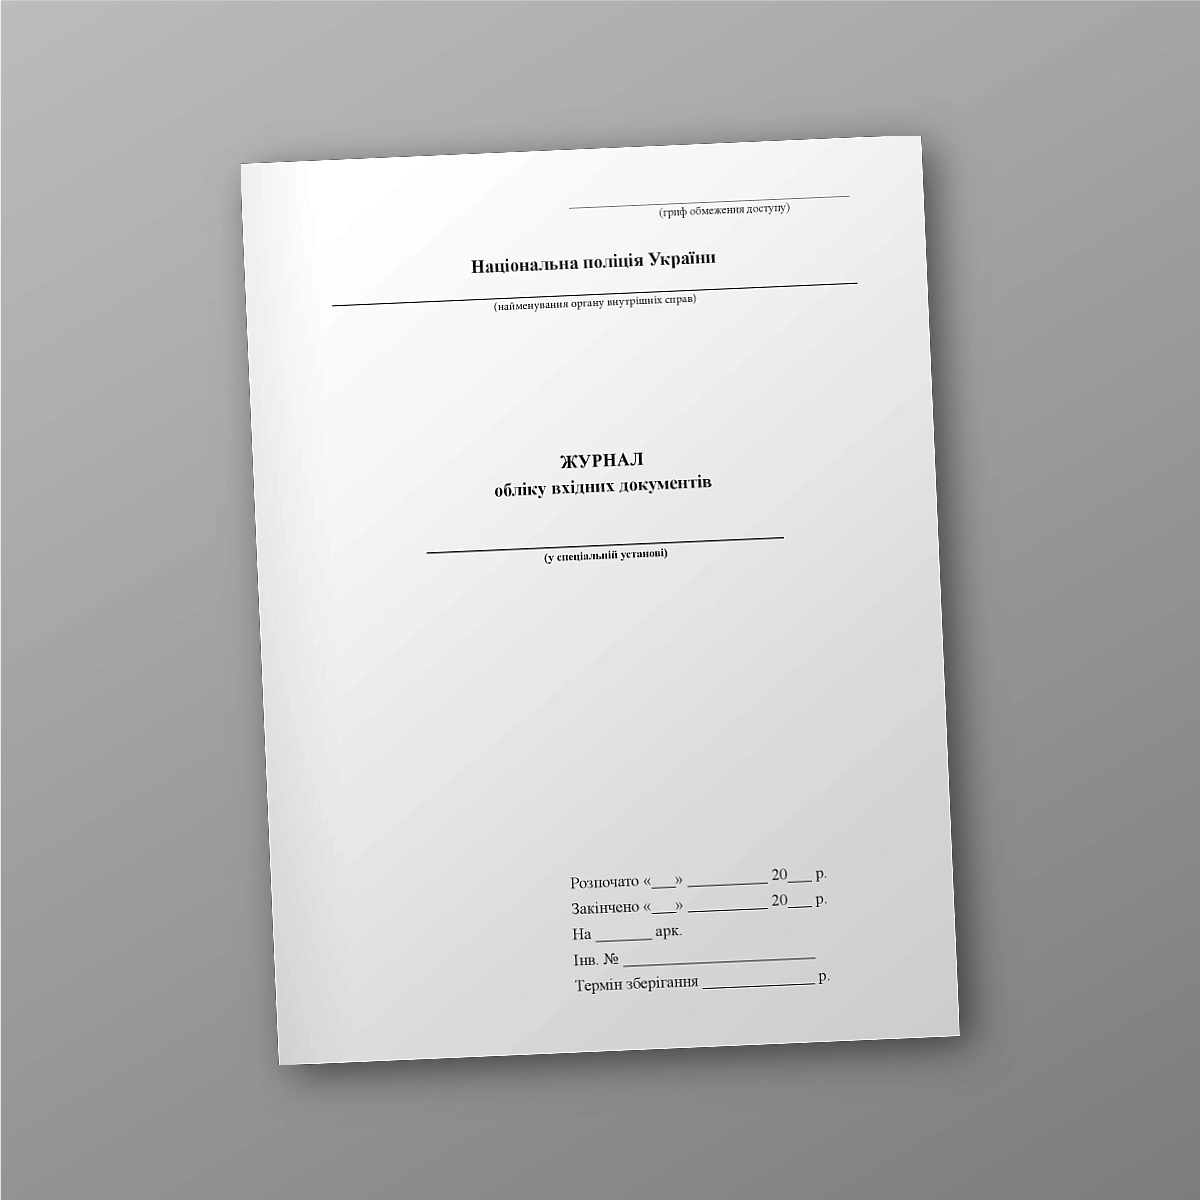 Journal of accounting of incoming documents | PrintTo: